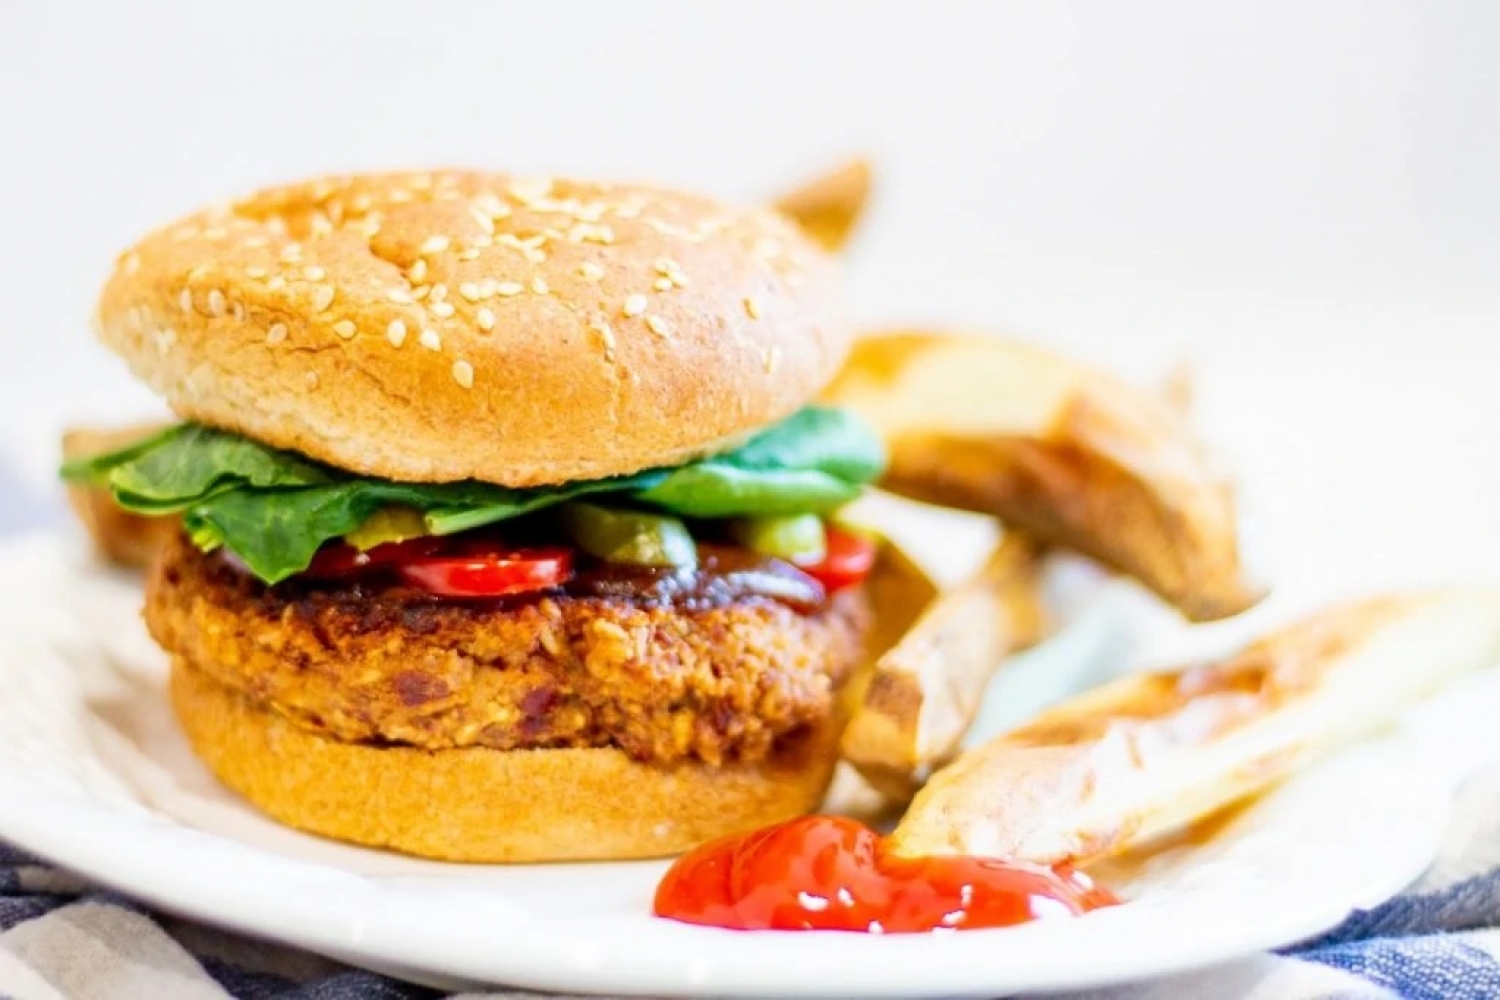 <p>These smoky, crunchy bean-based burgers are a great plant-based substitute to beef and no less satisfying. Flavored with tasty seasonings and your favorite BBQ sauce, they can even be cooked on the grill—or baked, pan-seared or air-fried! <a href="https://veryveganish.com/bbq-kidney-bean-burgers-vegan-grilled/" rel="noopener">Get the recipe here.</a></p>